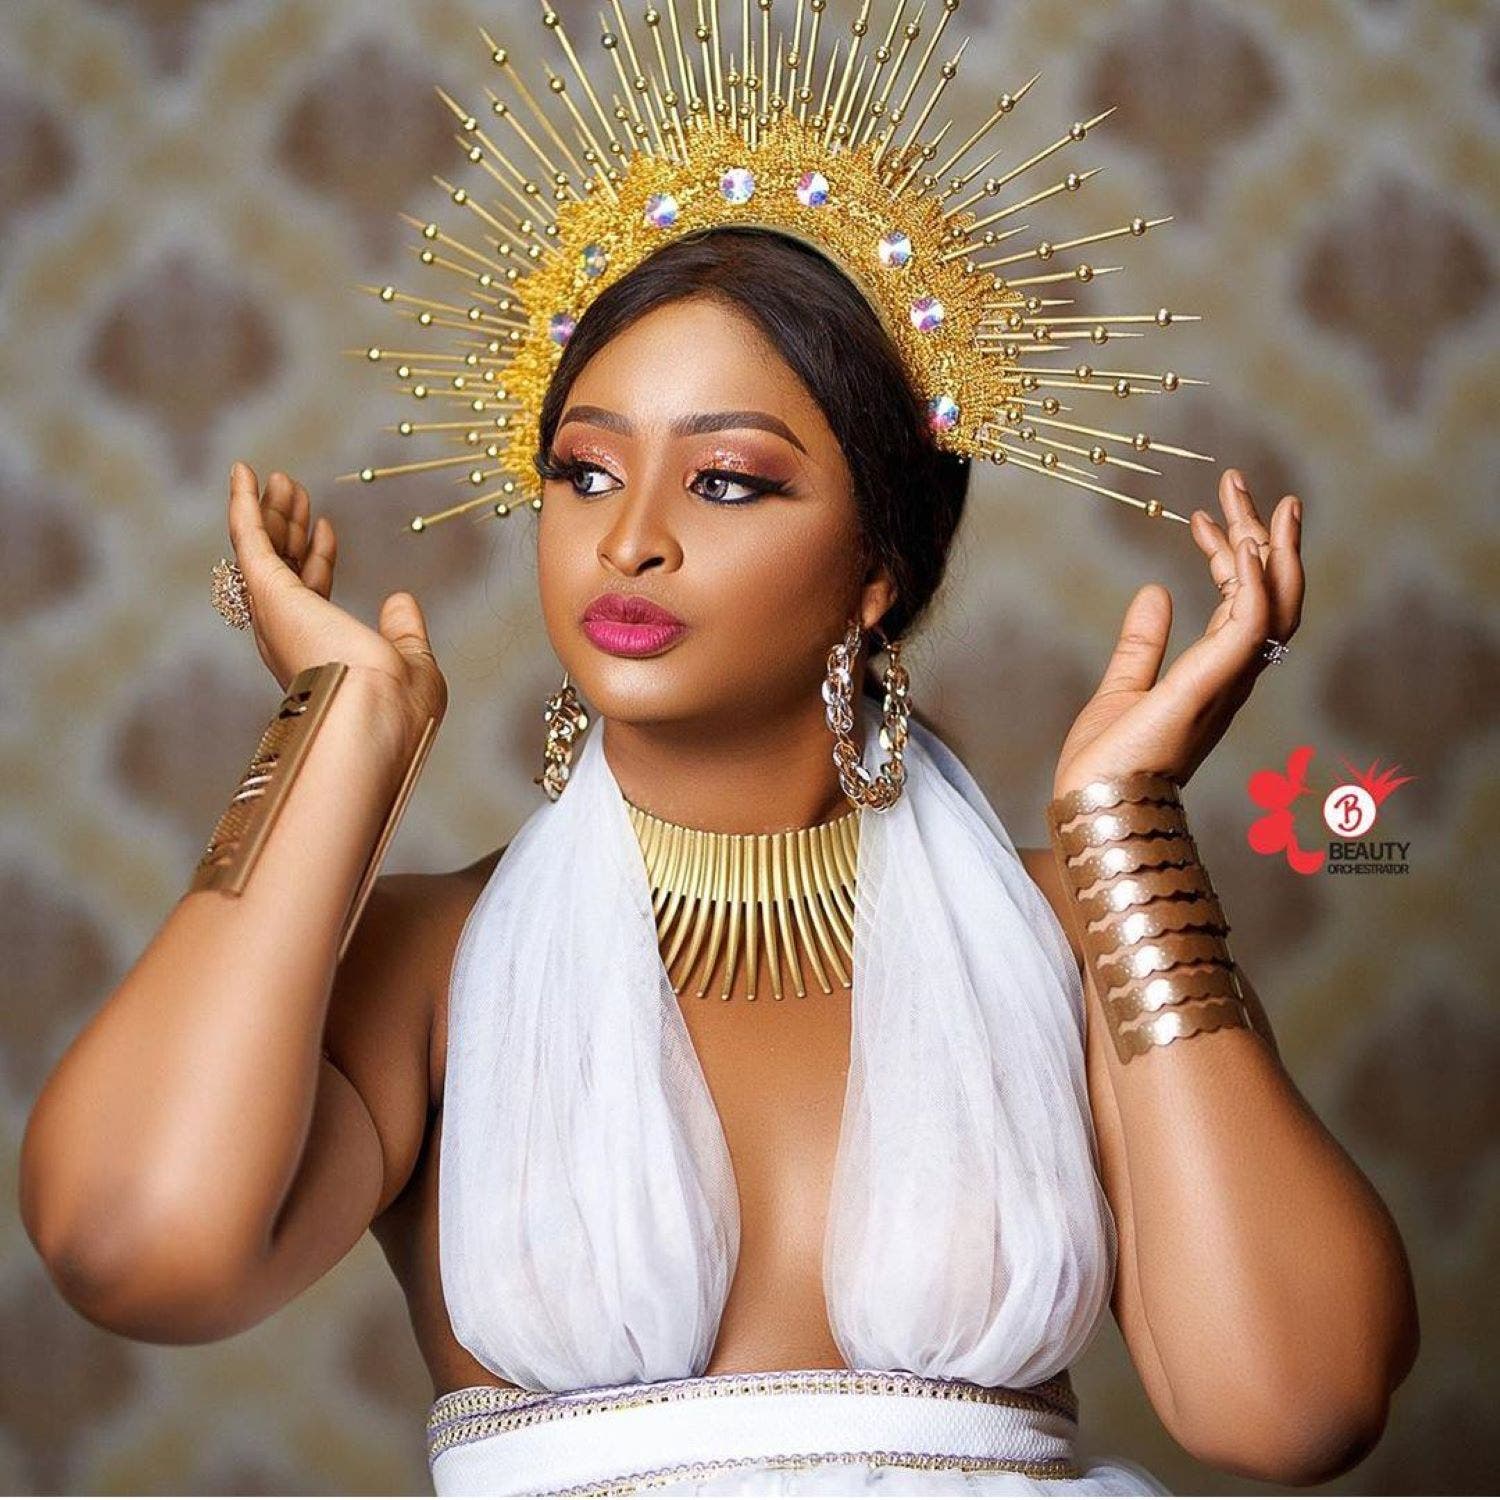 ‘Comedy is my way of escape’ – Etinosa Idemudia reveals what makes her overcome fear